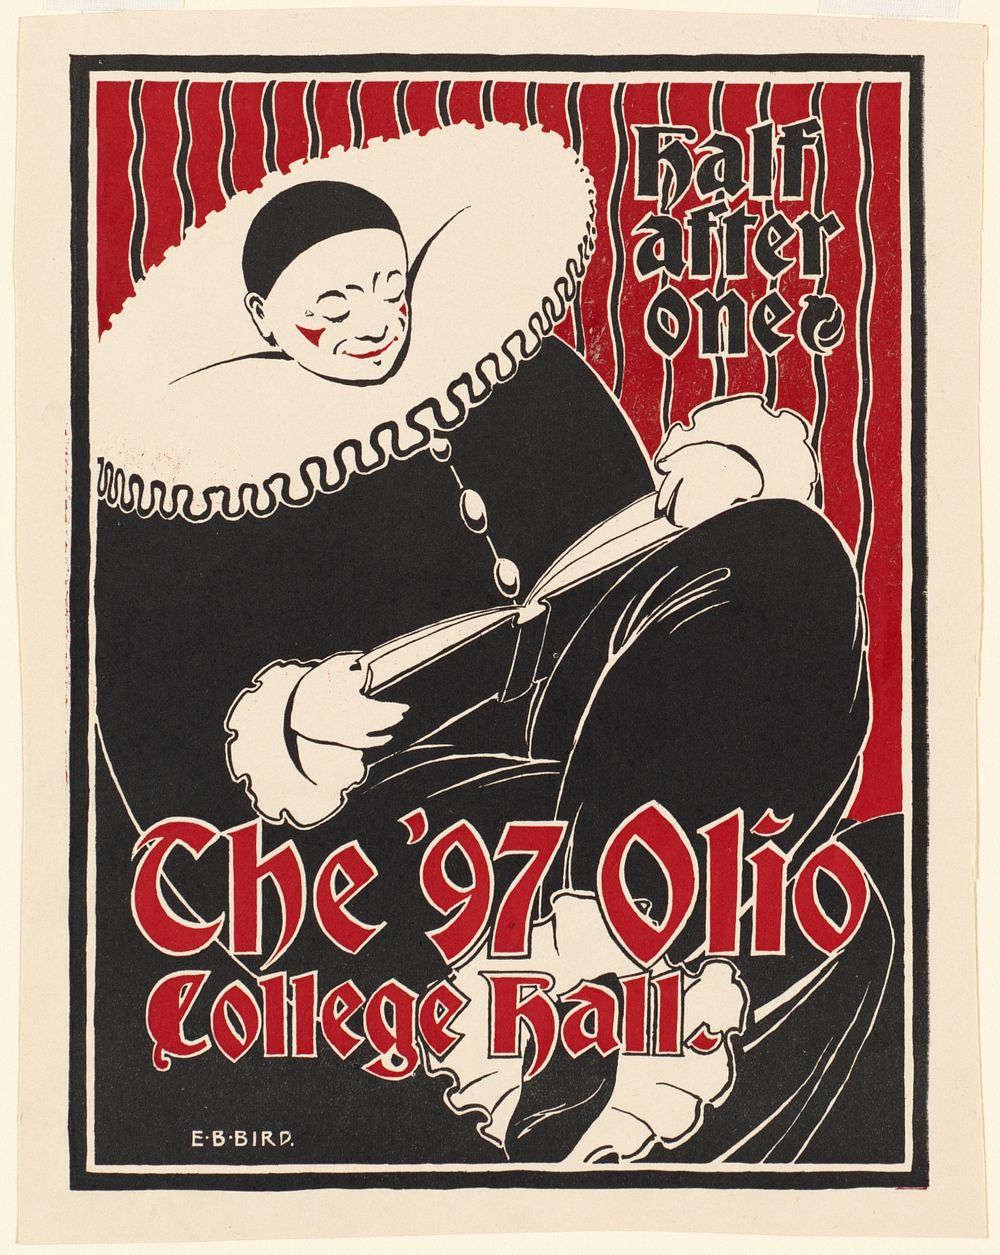             Half after one, the '97 Olio College hall          